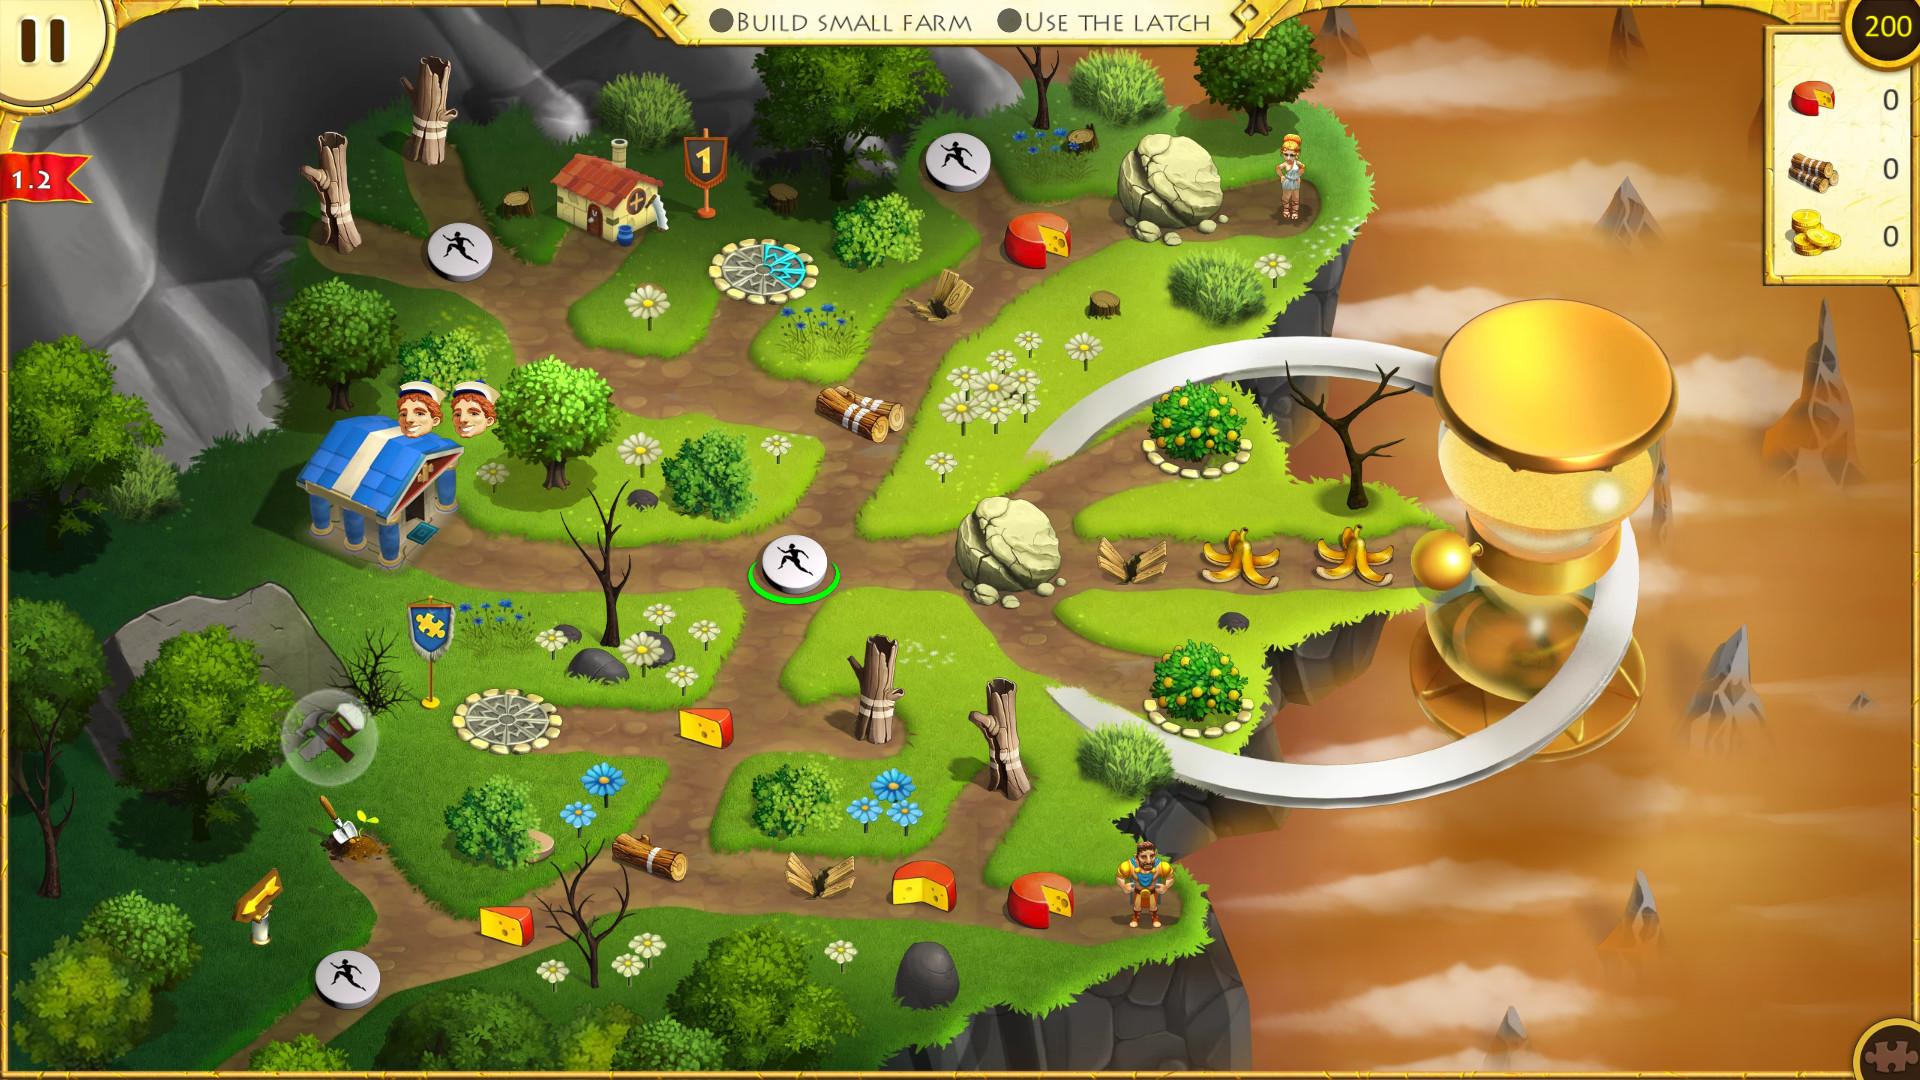 12 Labours of Hercules XII: Timeless Adventure Free Download